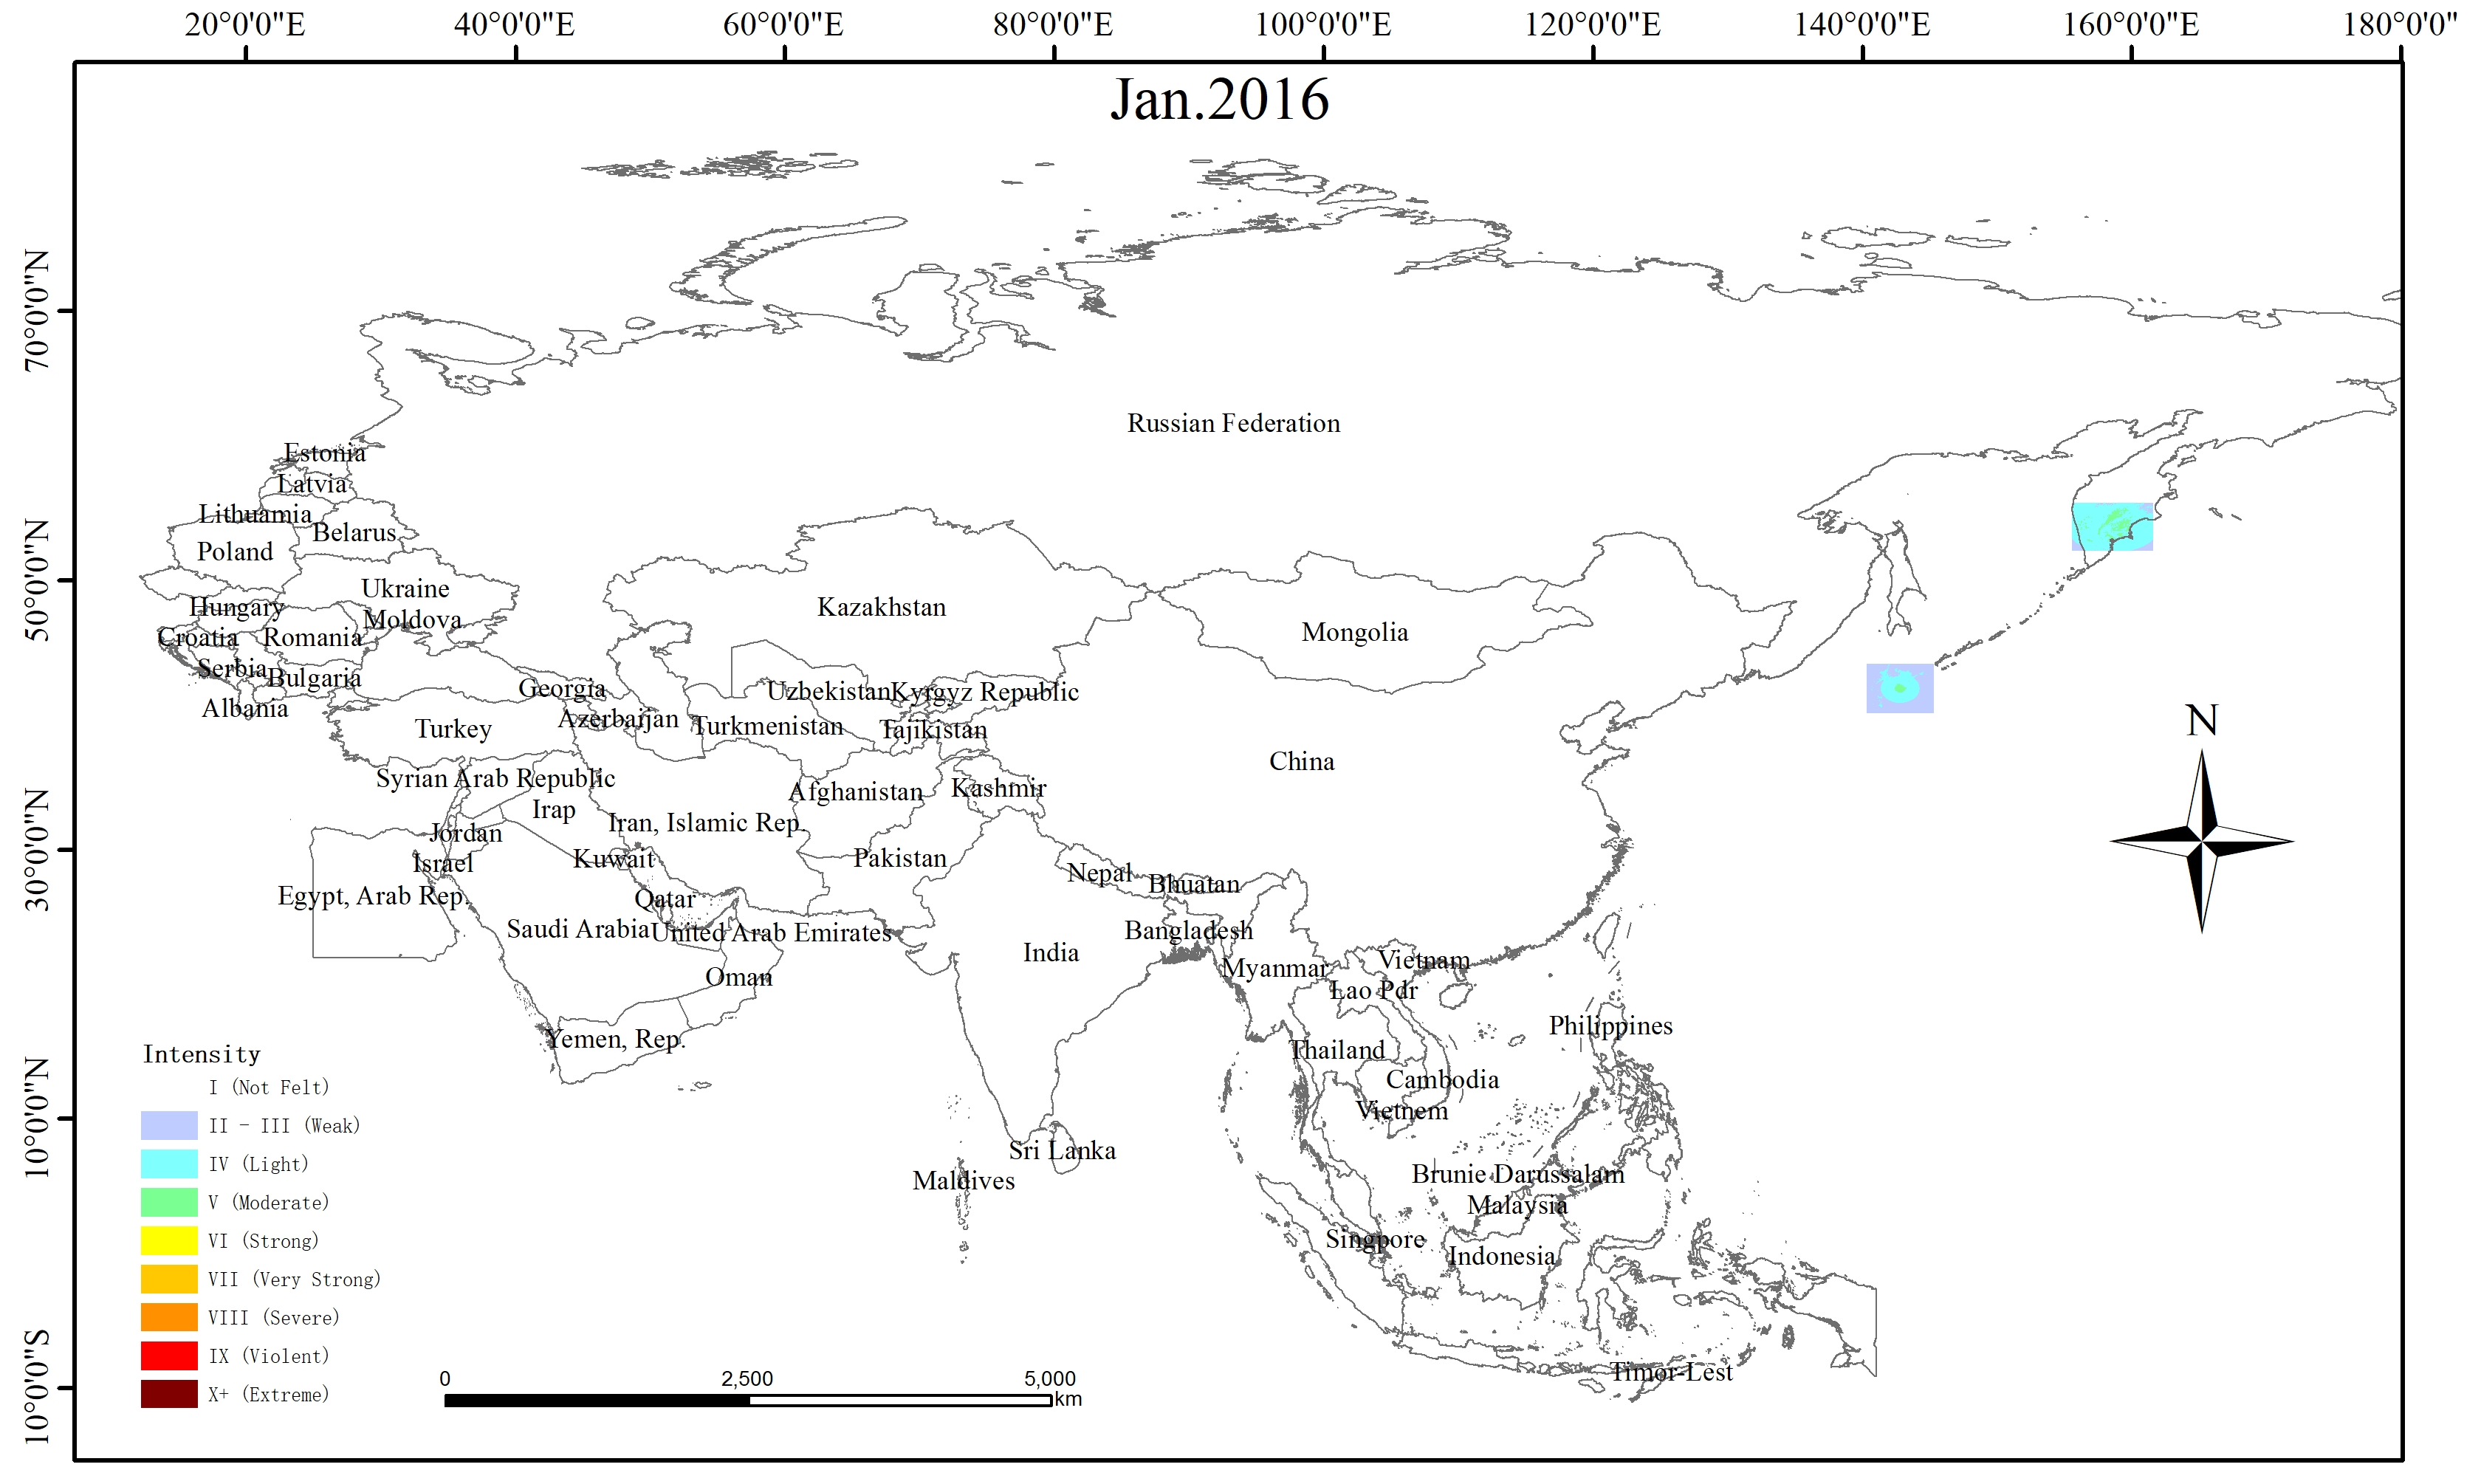 Spatio-temporal Distribution of Earthquake Disaster in the Belt and Road Area in 2016